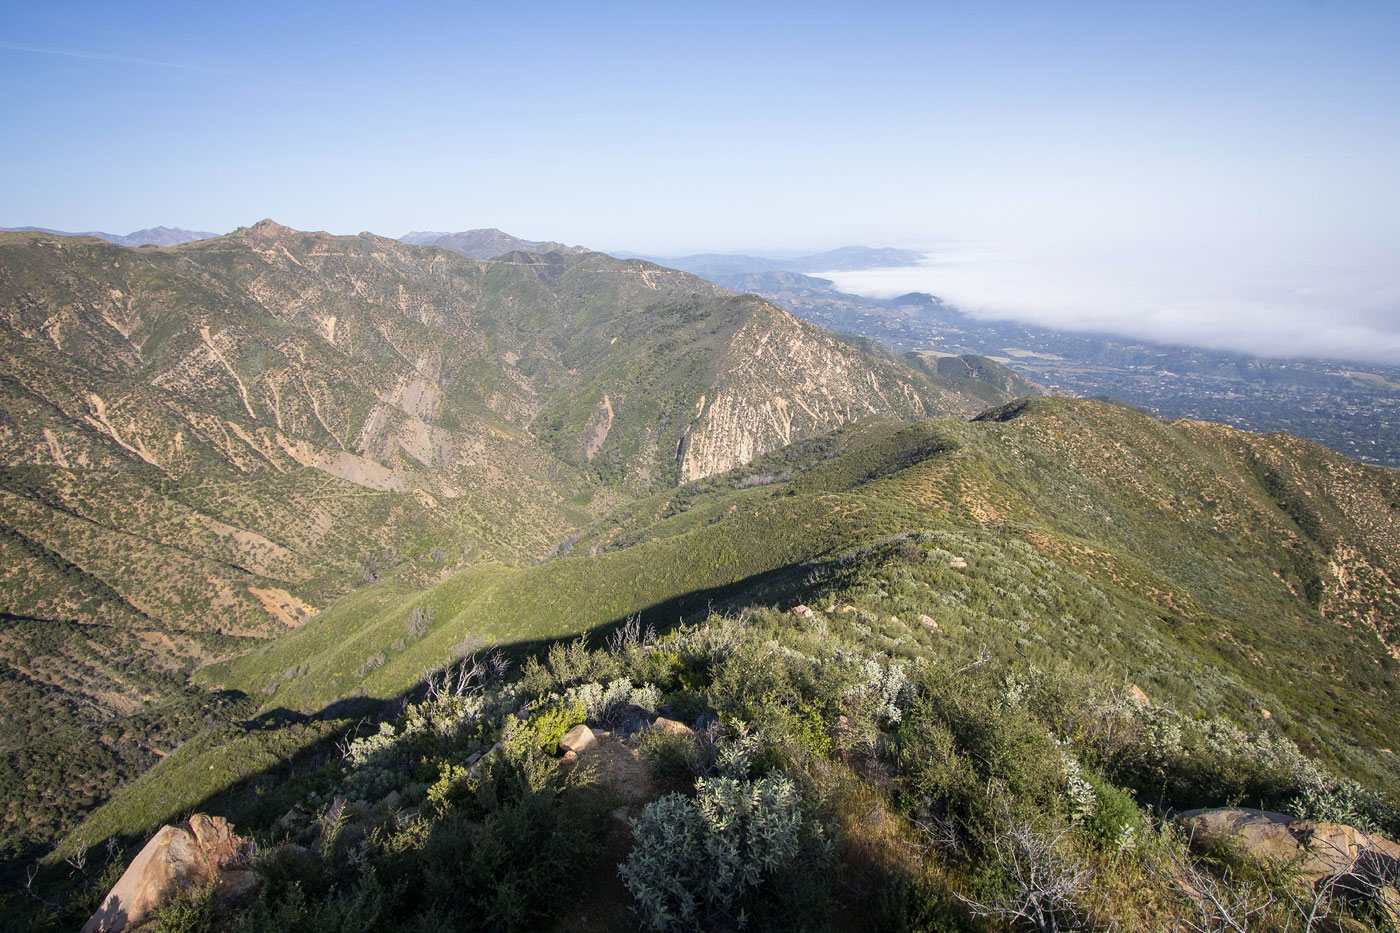 Hike Montecito Peak in Los Padres National Forest, California - Stav is Lost